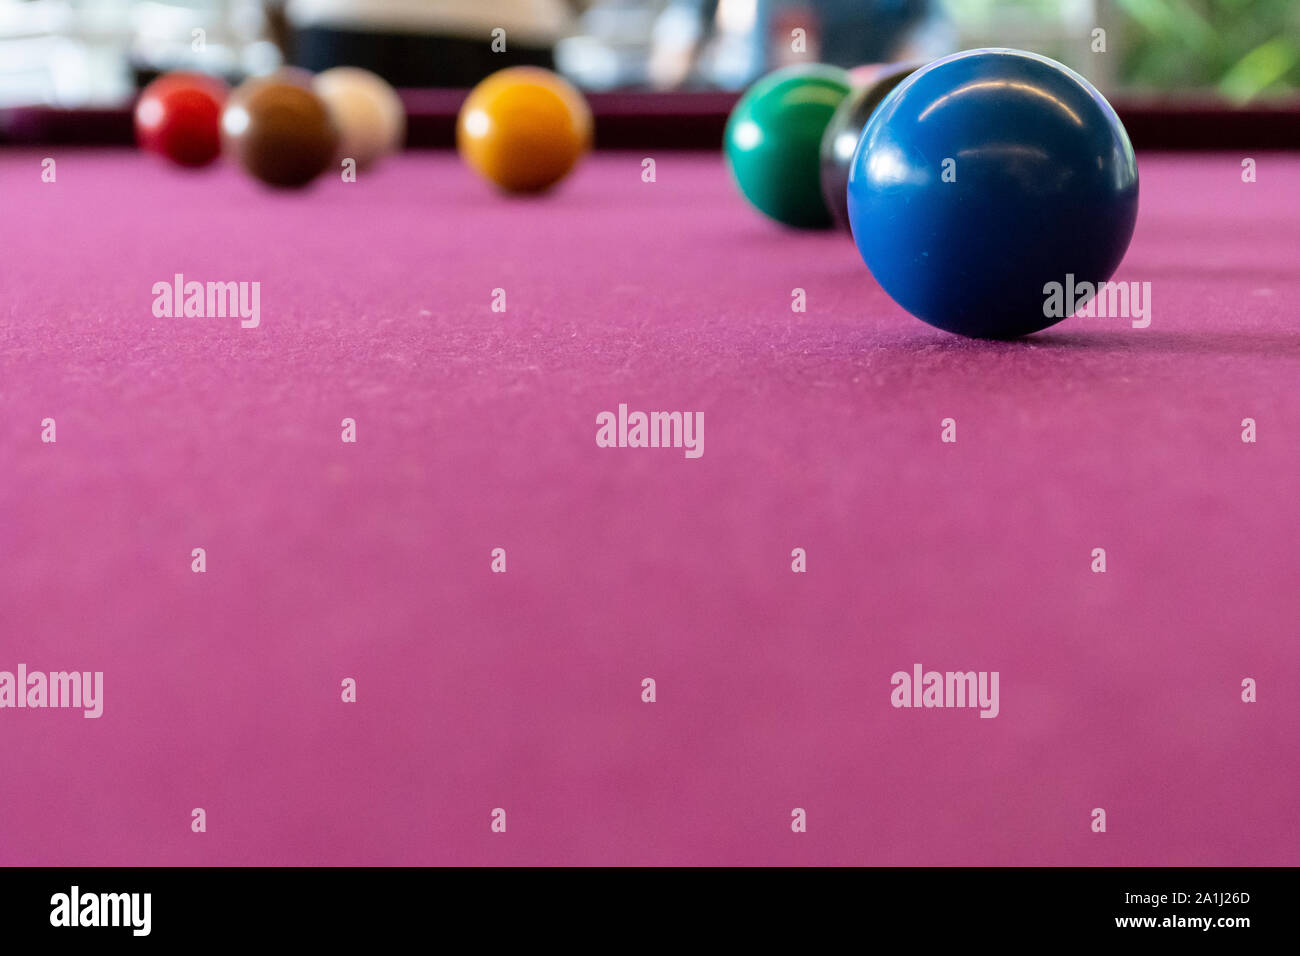 pink snooker table with colored balls Stock Photo